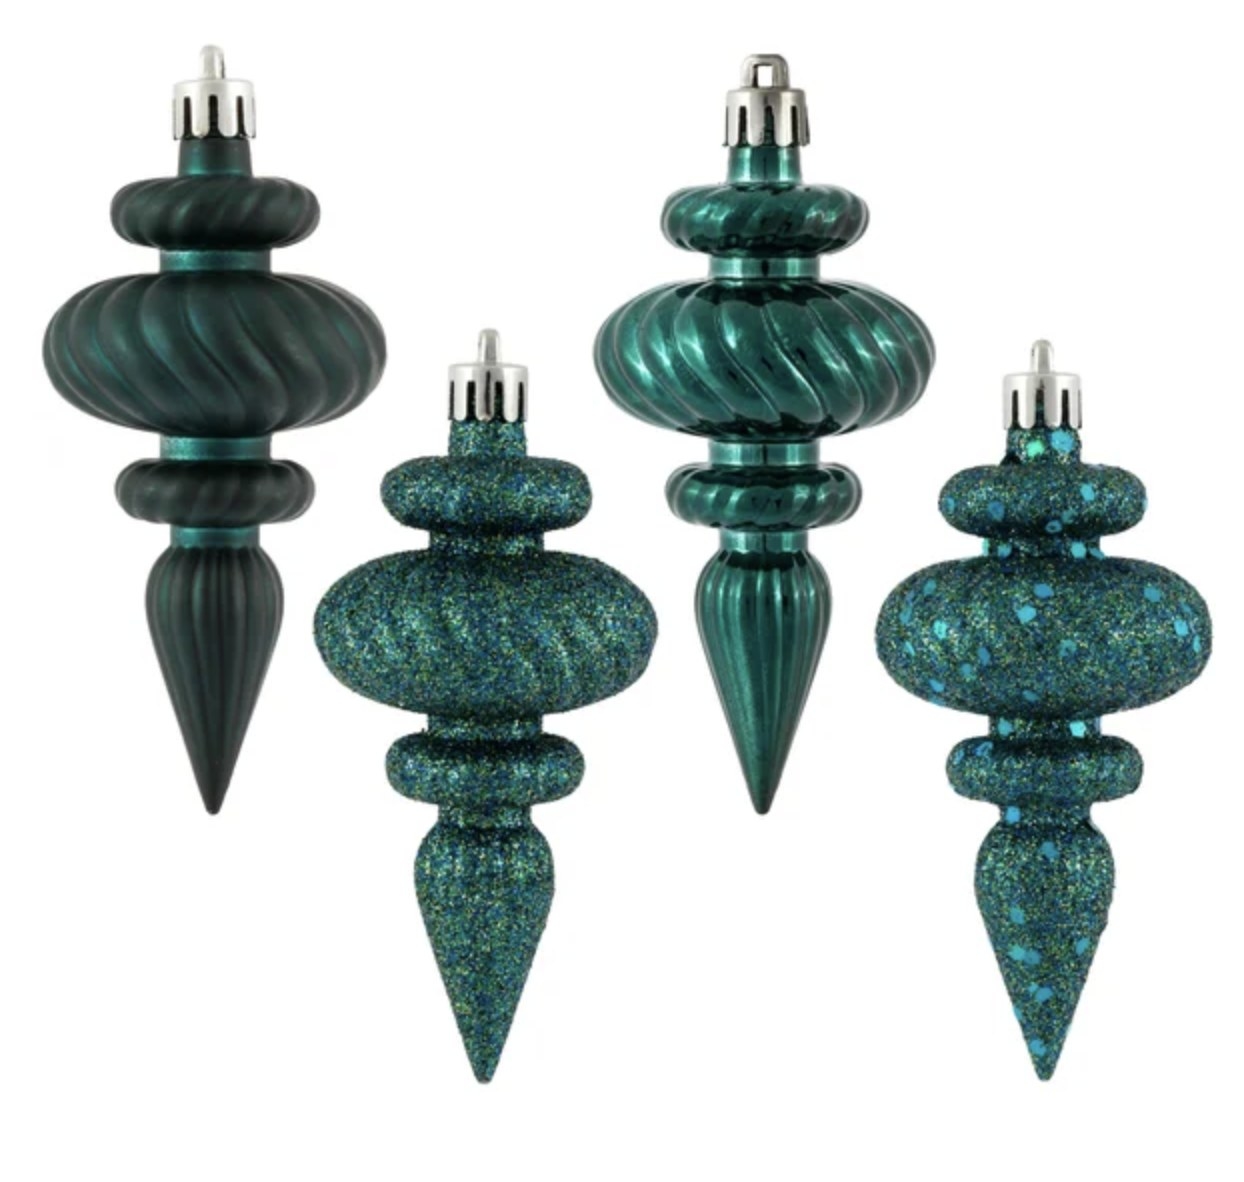 There are four deep emerald ornaments with various textures ranging from matte to glitter